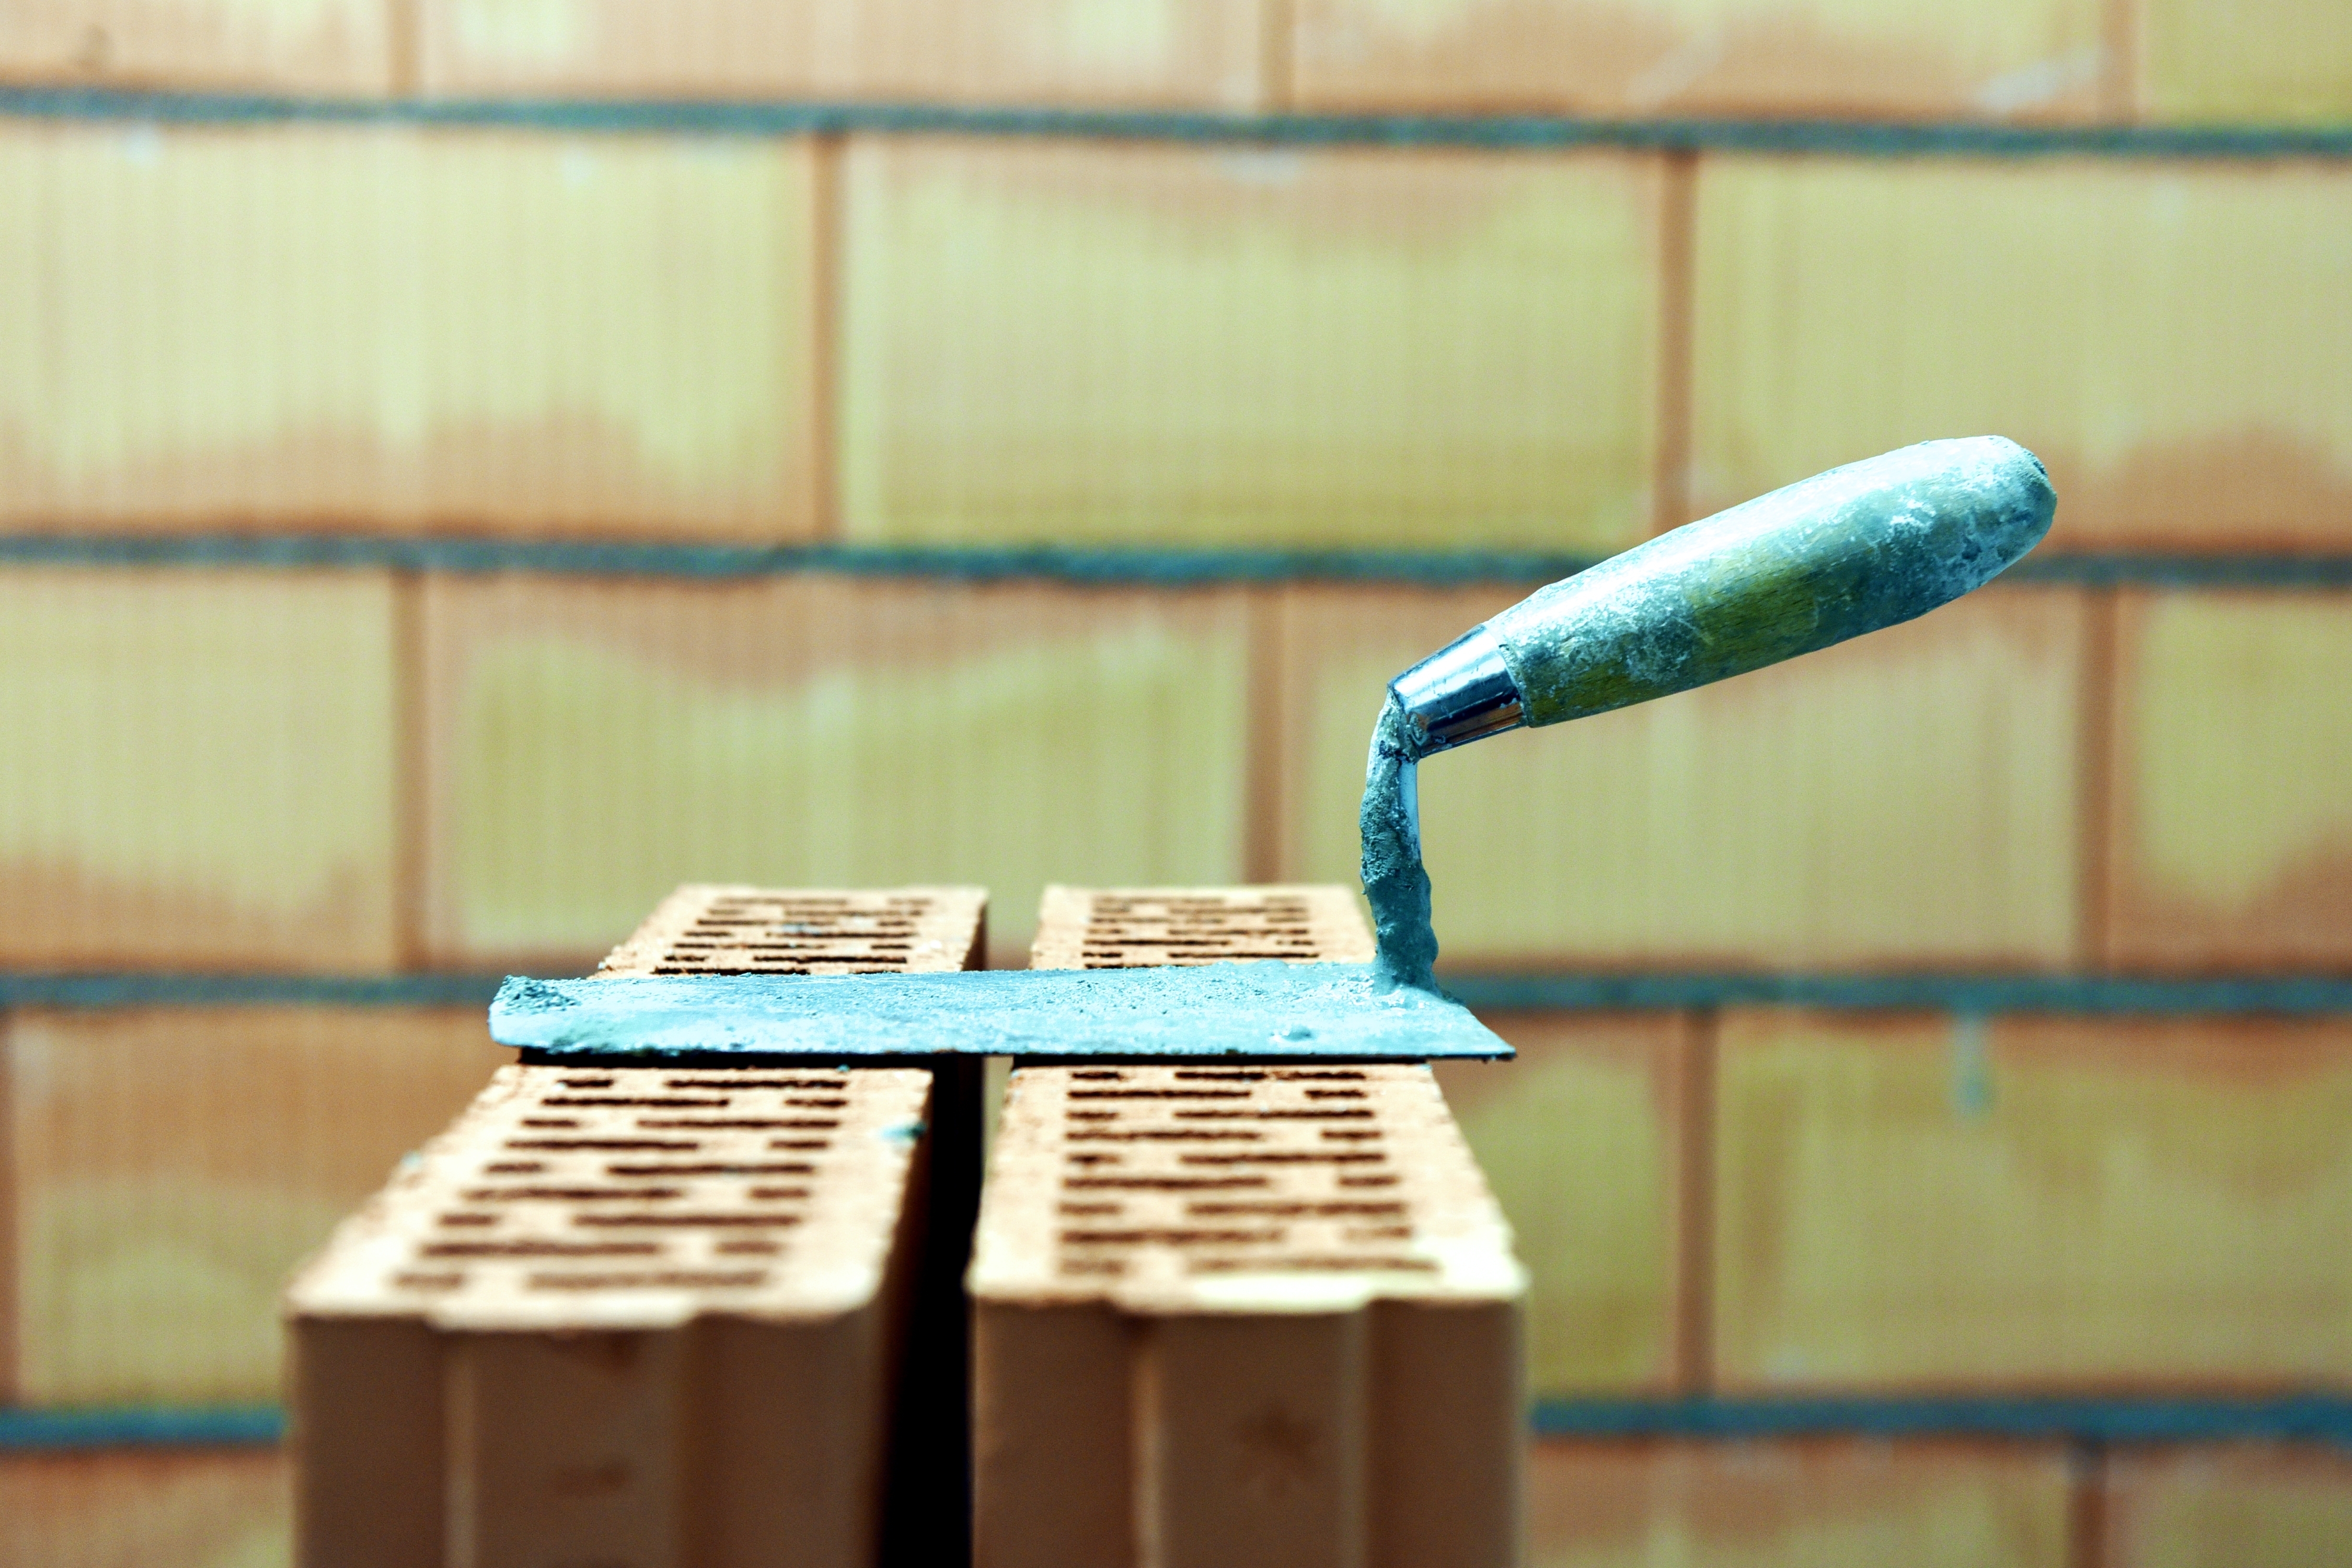 A bricklaying tool placed on top of a stack of bricks.